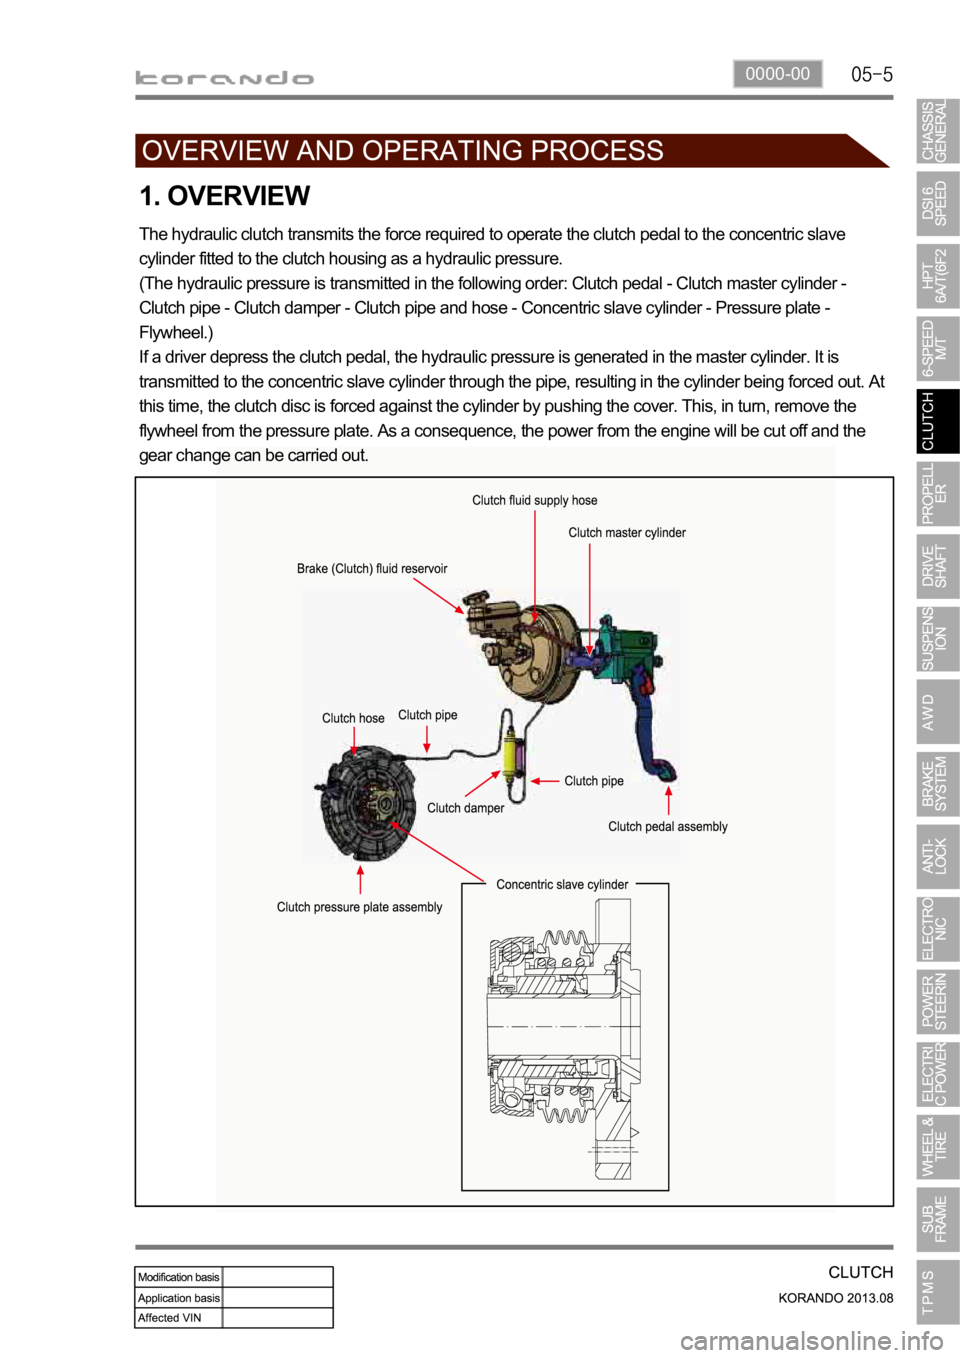 SSANGYONG KORANDO 2013 Owners Guide 0000-00
1. OVERVIEW
The hydraulic clutch transmits the force required to operate the clutch pedal to the concentric slave 
cylinder fitted to the clutch housing as a hydraulic pressure.
(The hydraulic